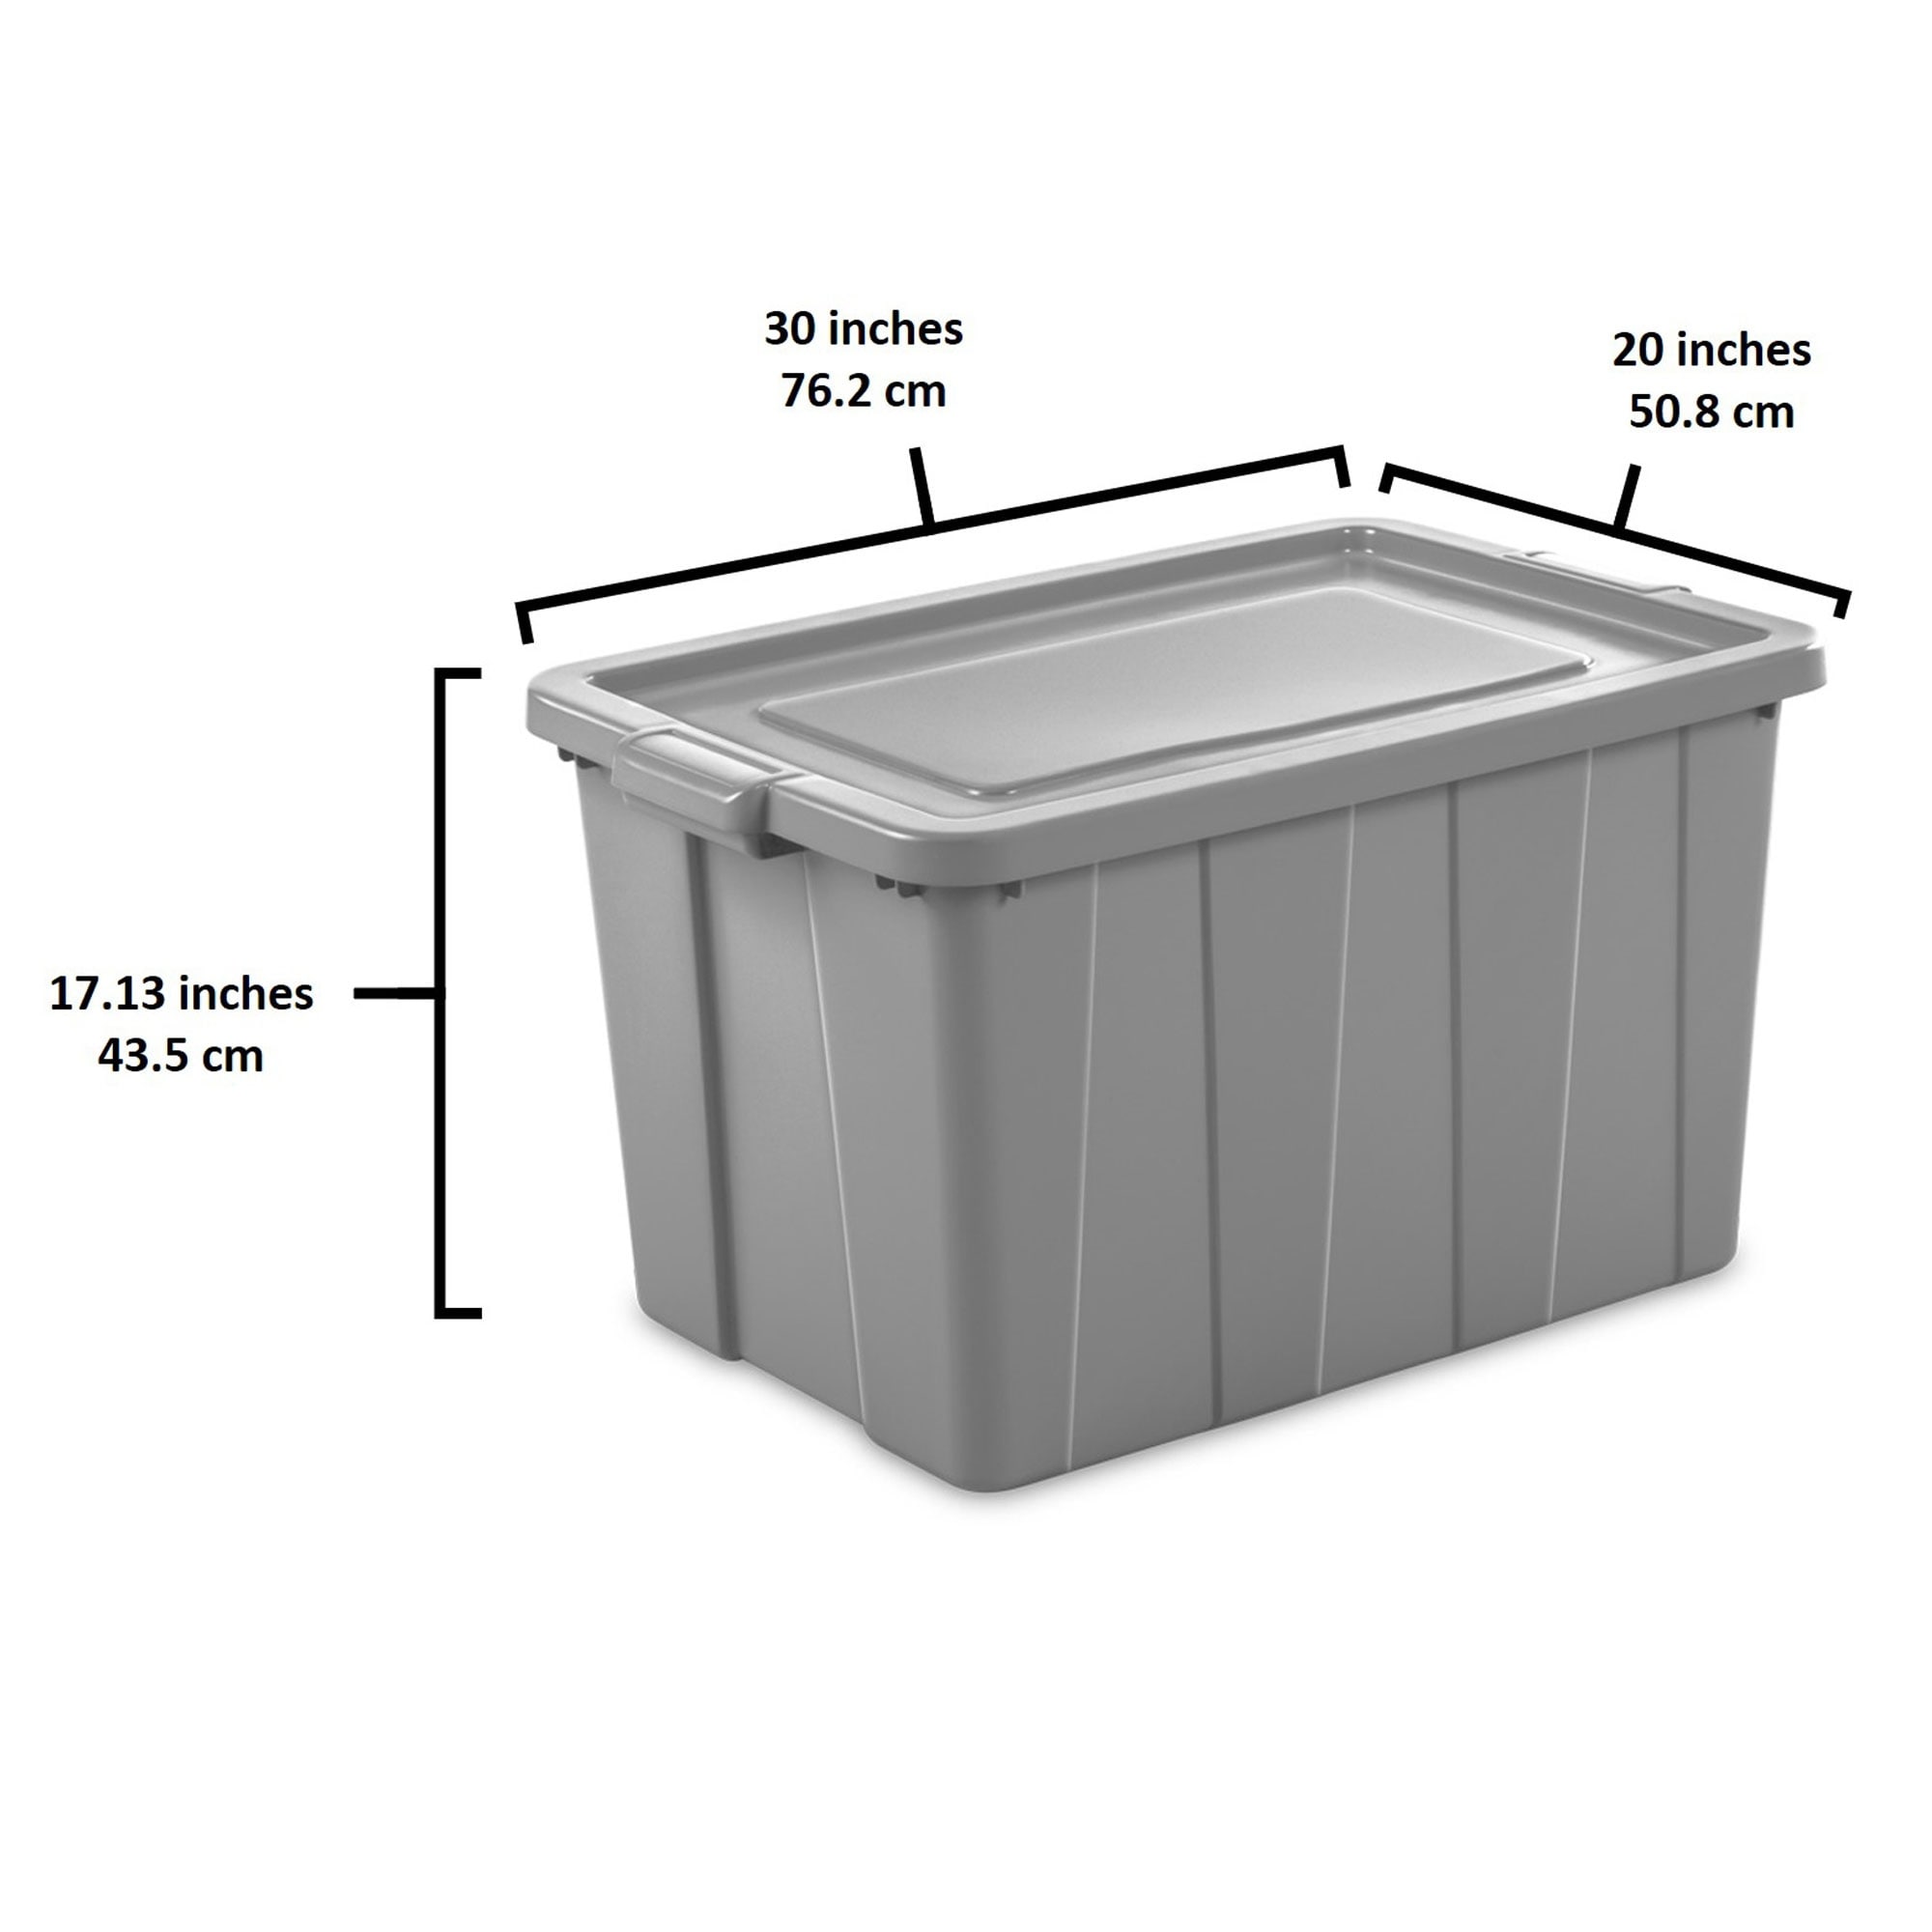 https://ak1.ostkcdn.com/images/products/is/images/direct/dae0568c12ca92988f2cb42b5186c0a720399076/Sterilite-Tuff1-30-Gallon-Plastic-Storage-Tote-Container-Bin-with-Lid-%2816-Pack%29.jpg